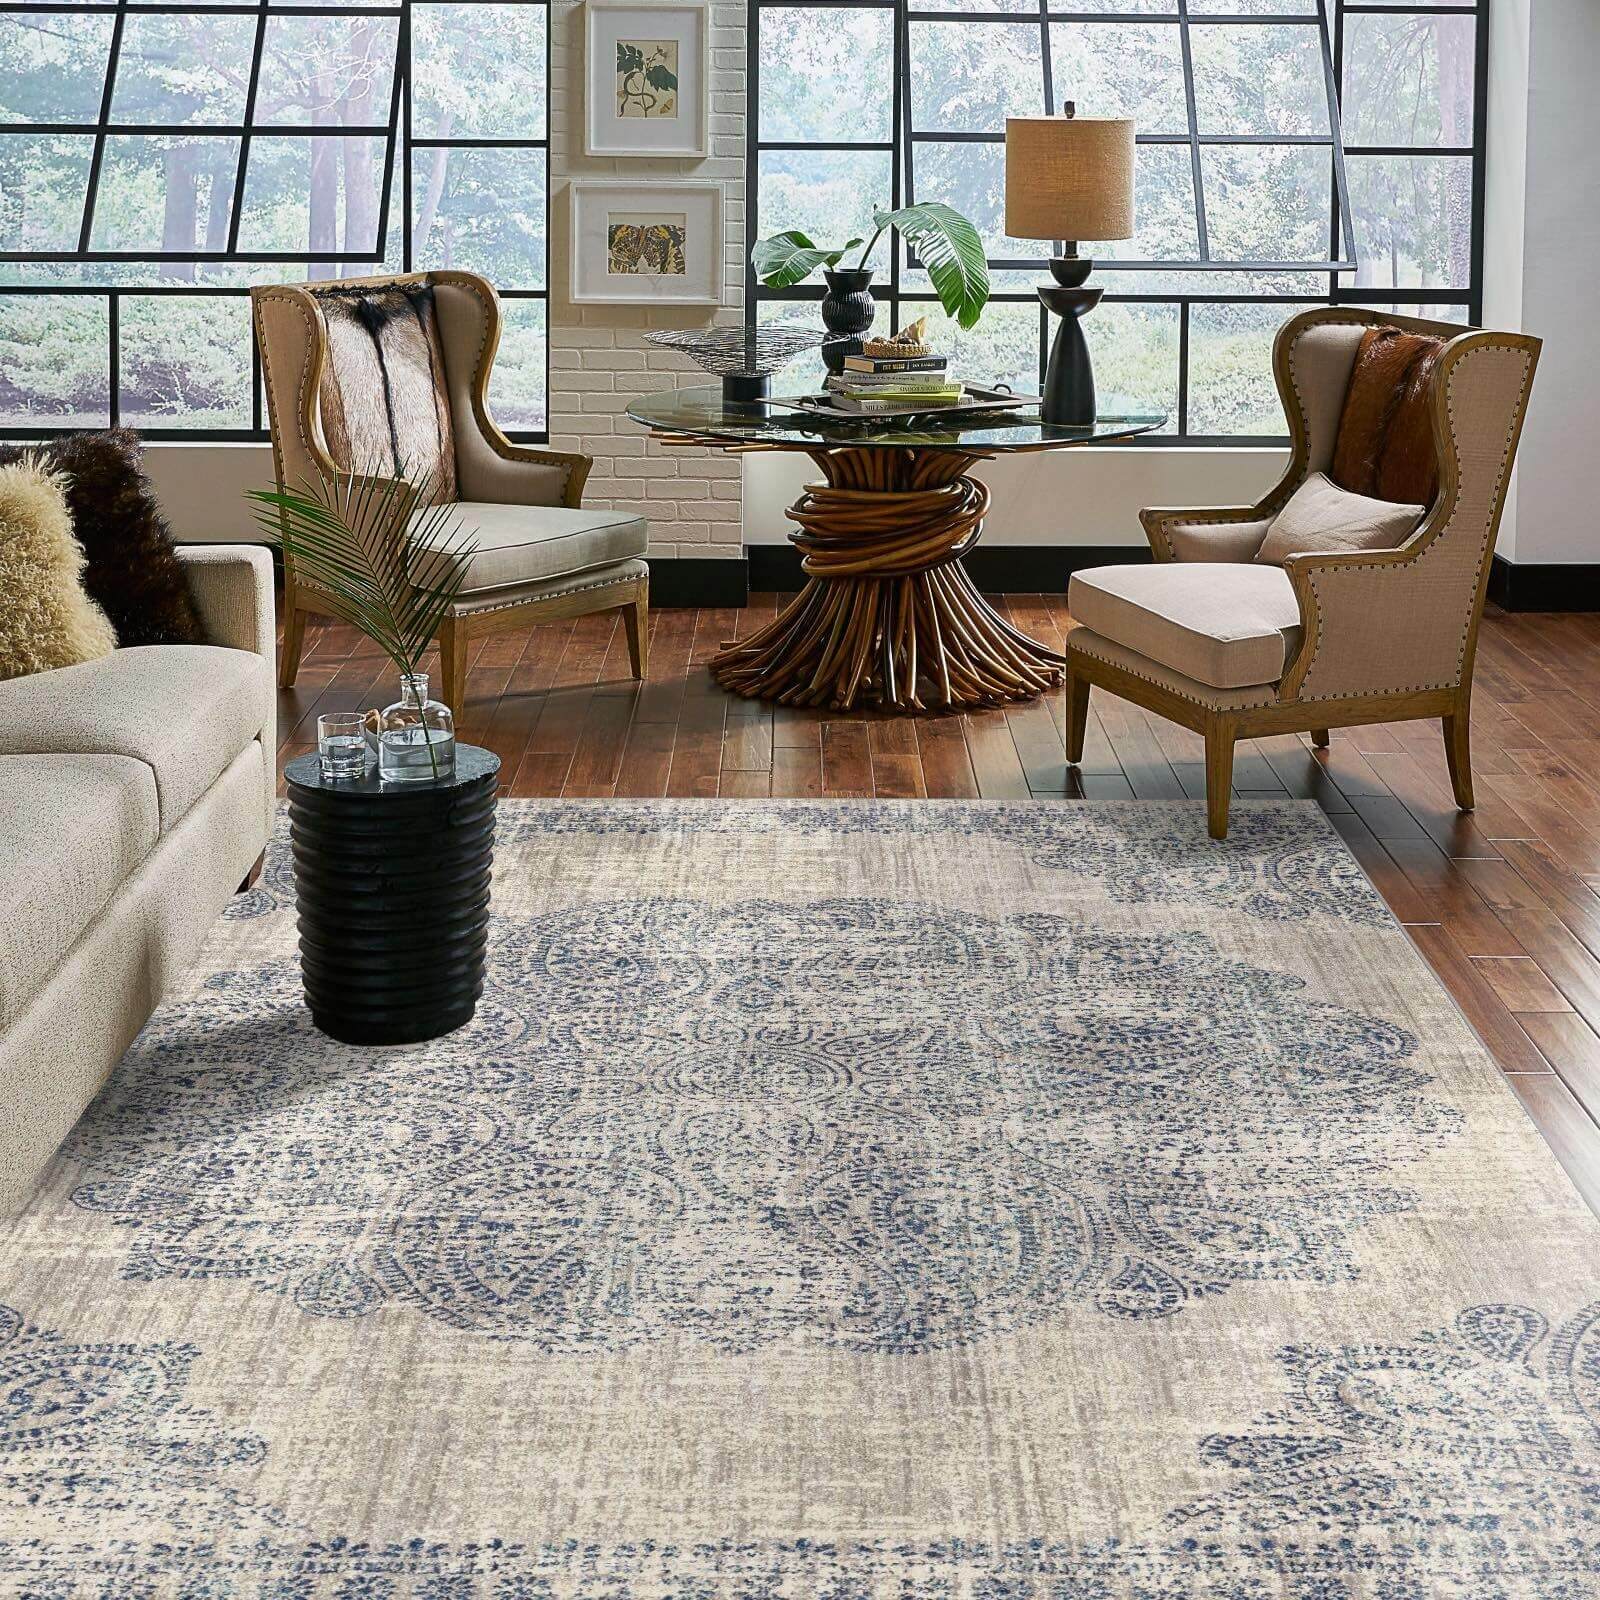 Living room area rug | LeClaire Flooring